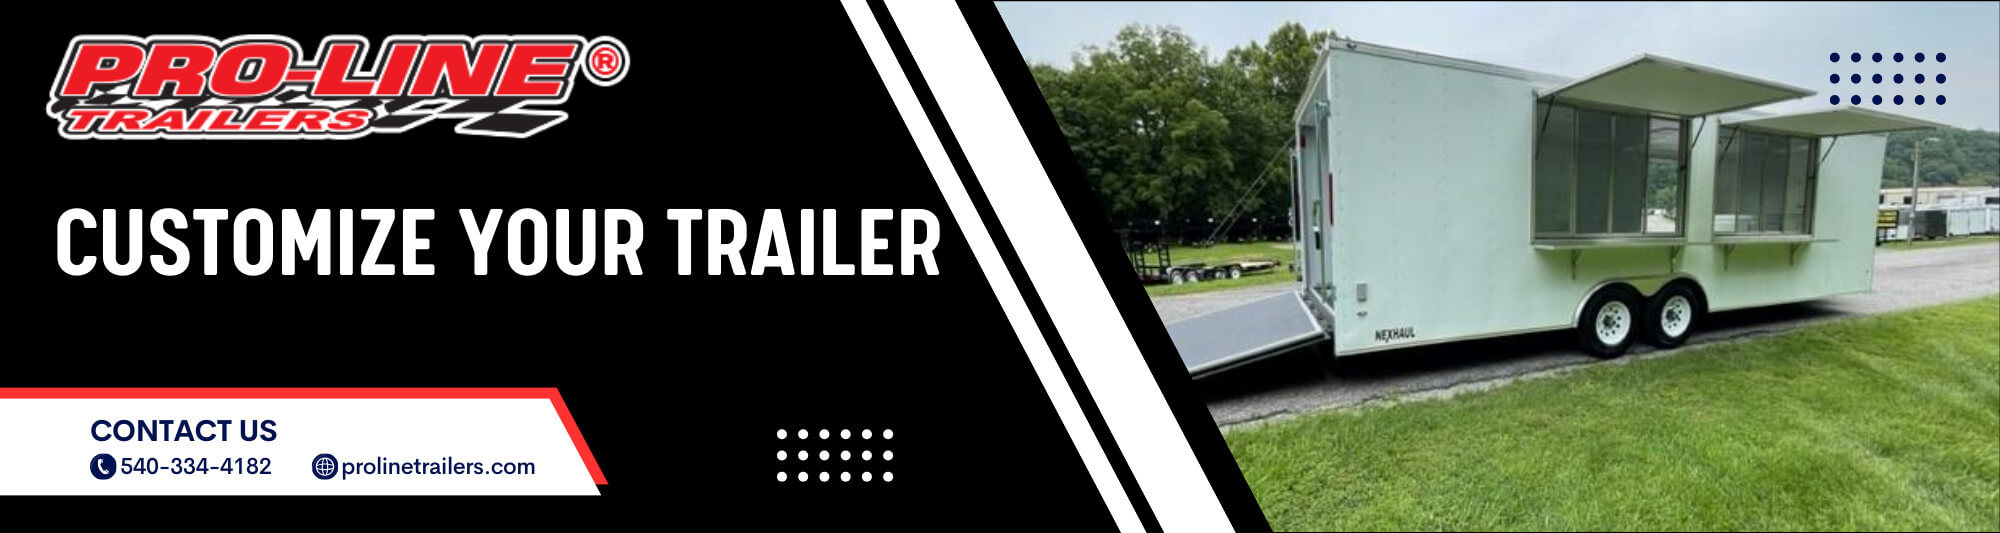 Customize Your Trailer Today! Header